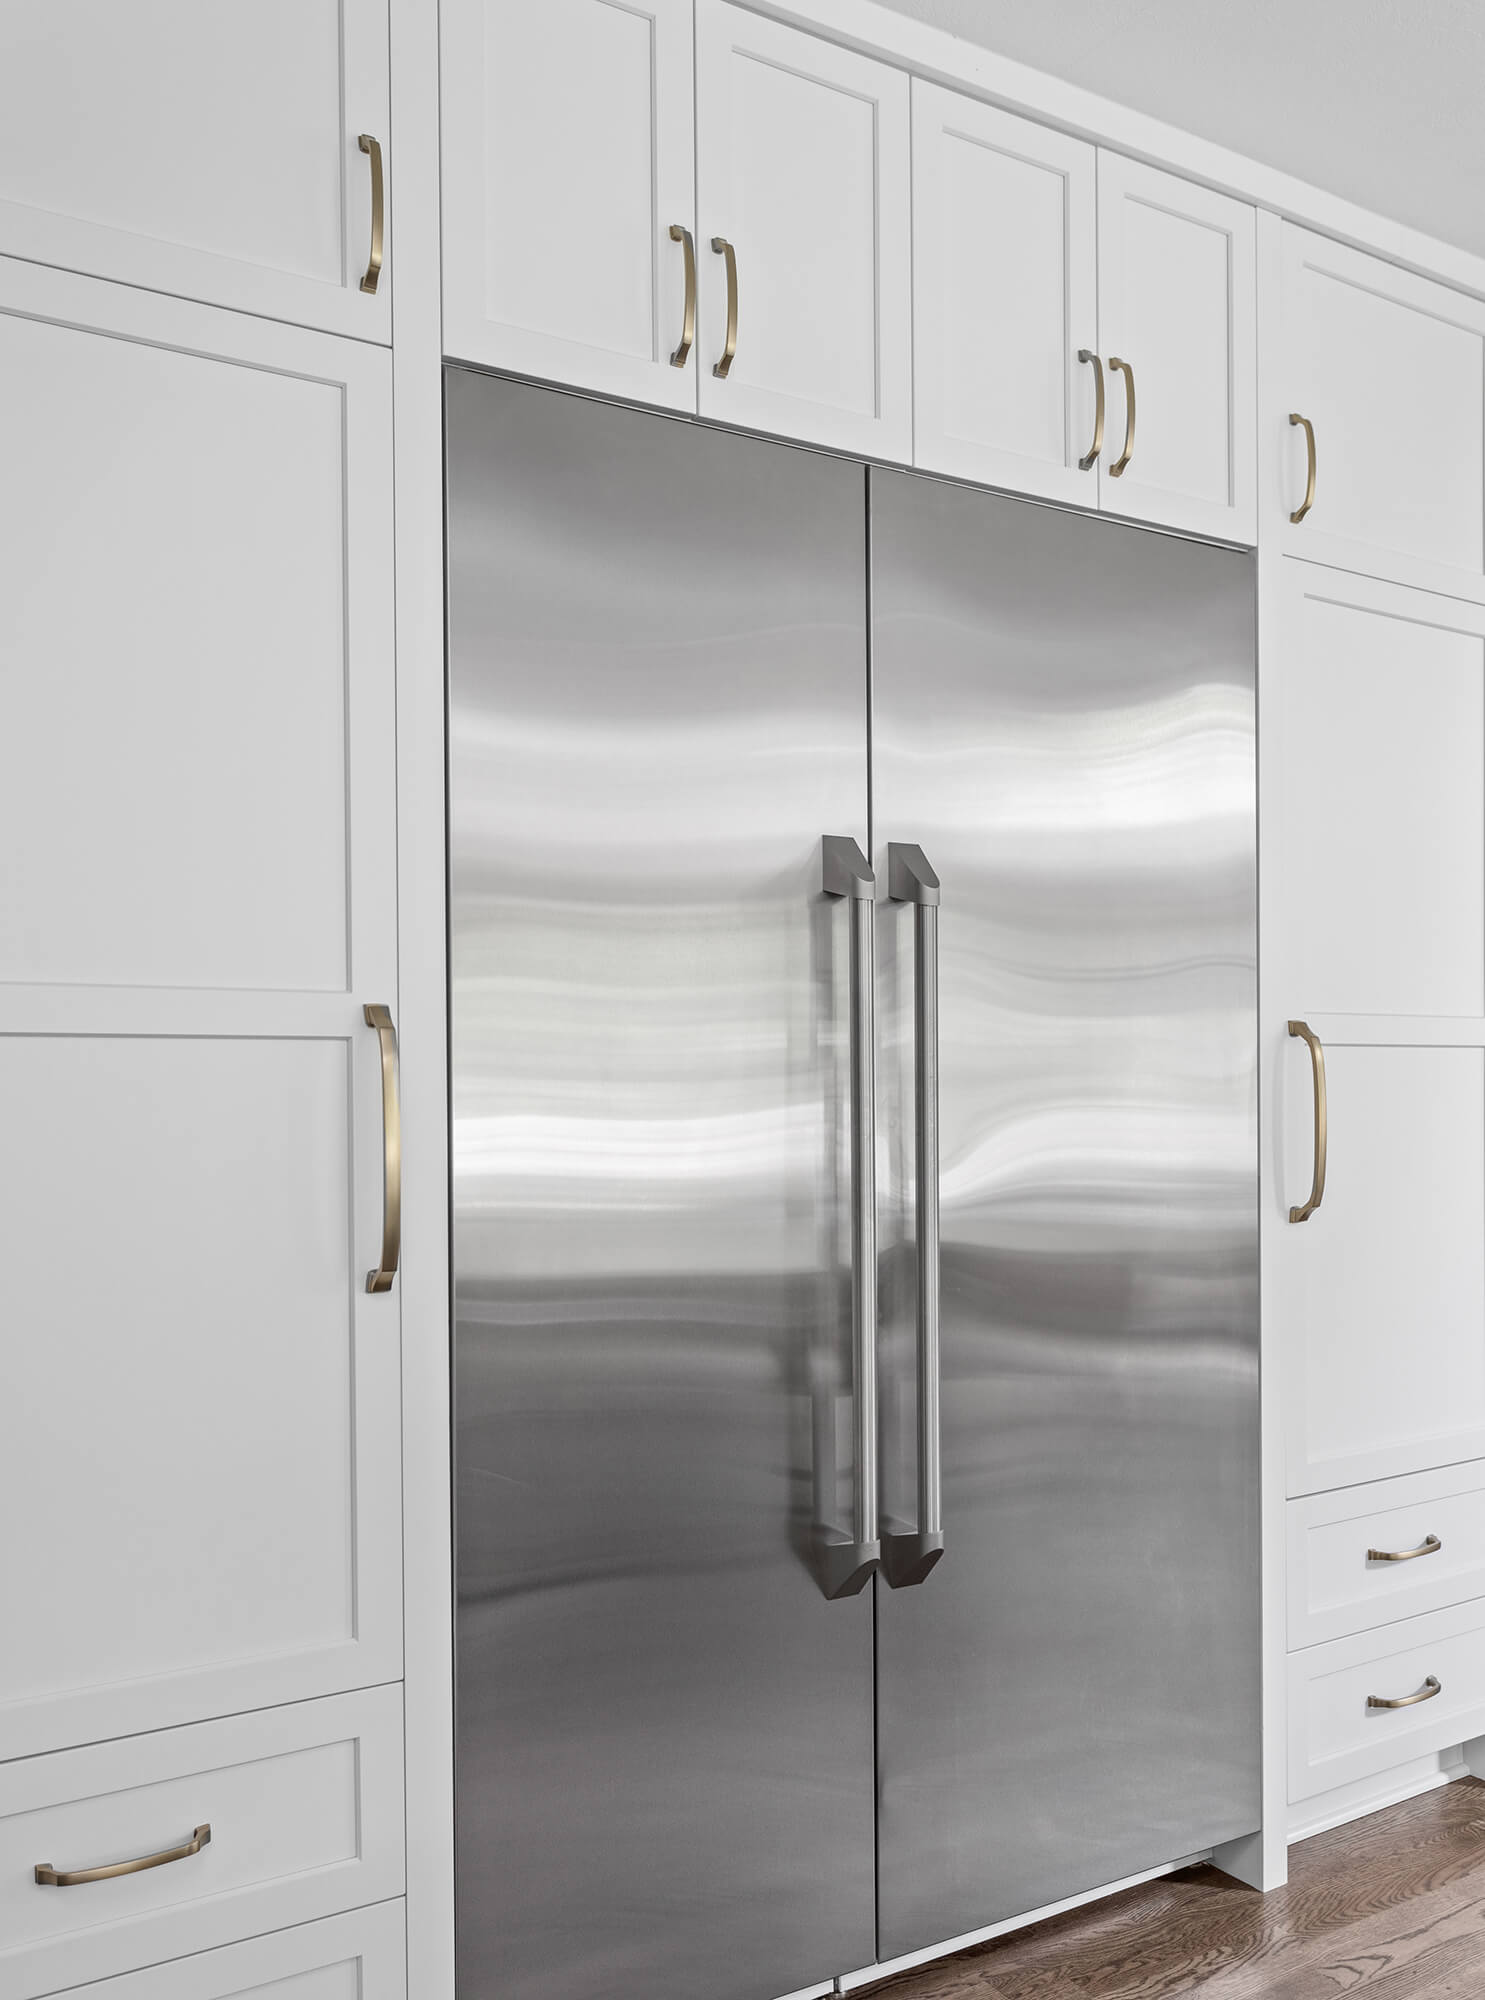 The fridge wall has floor to ceiling cabinets with a white painted finish and shaker doors.